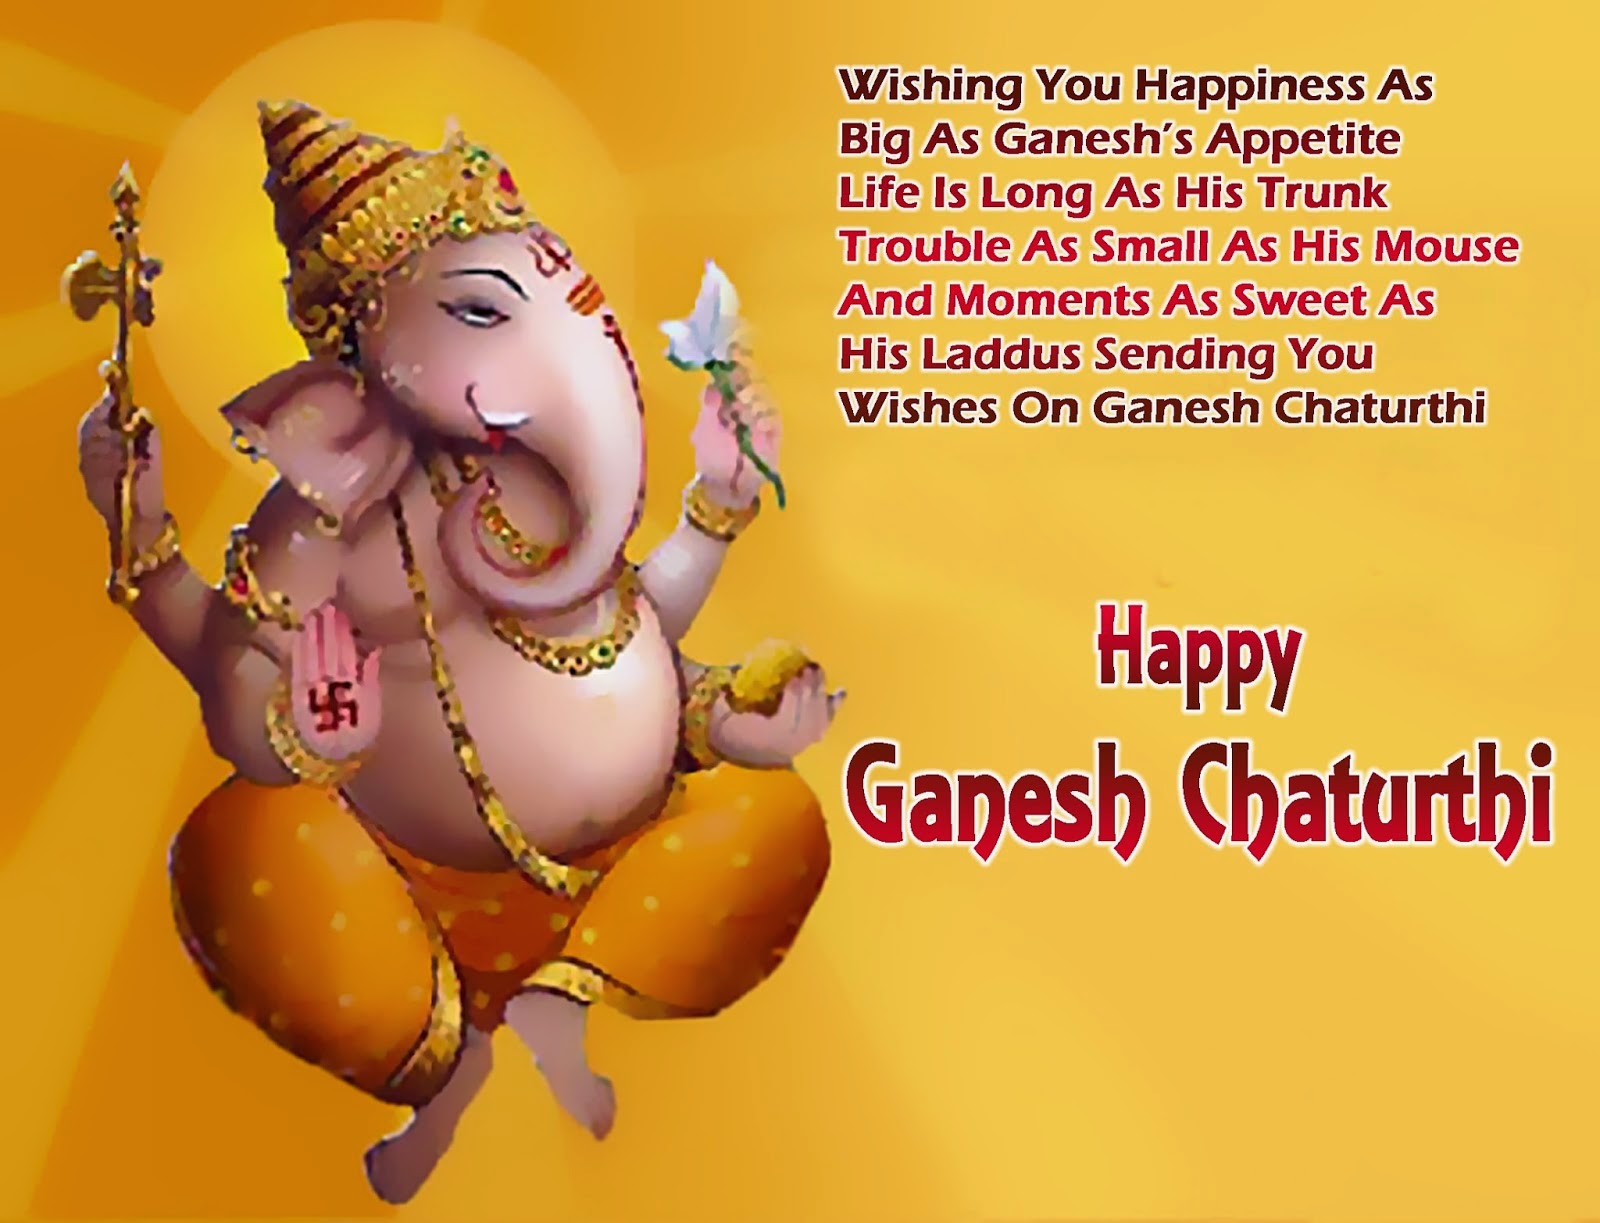 Cute Pictures Ganesh Chaturthi Hd Wallpapers Free Download Happy Vinayagar Chaturthi Images Happy Vinayagar Chaturthi Mobile Pictures